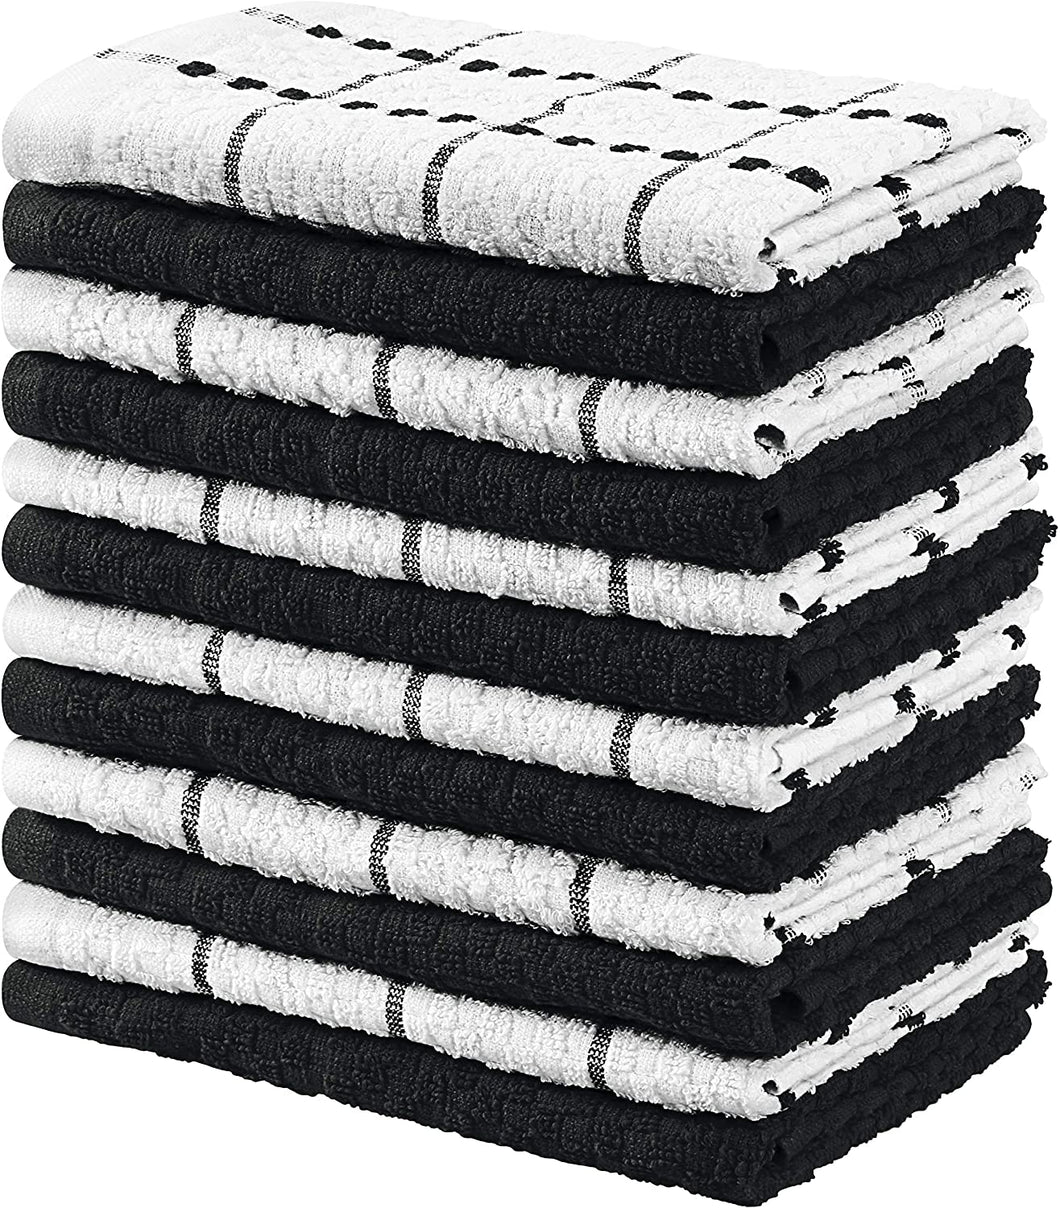 Towels Kitchen Towels, 15 x 25 Inches, 100% Ring Spun Cotton Super Soft and Absorbent Black Dish Towels, Tea Towels and Bar Towels, (Pack of 12)